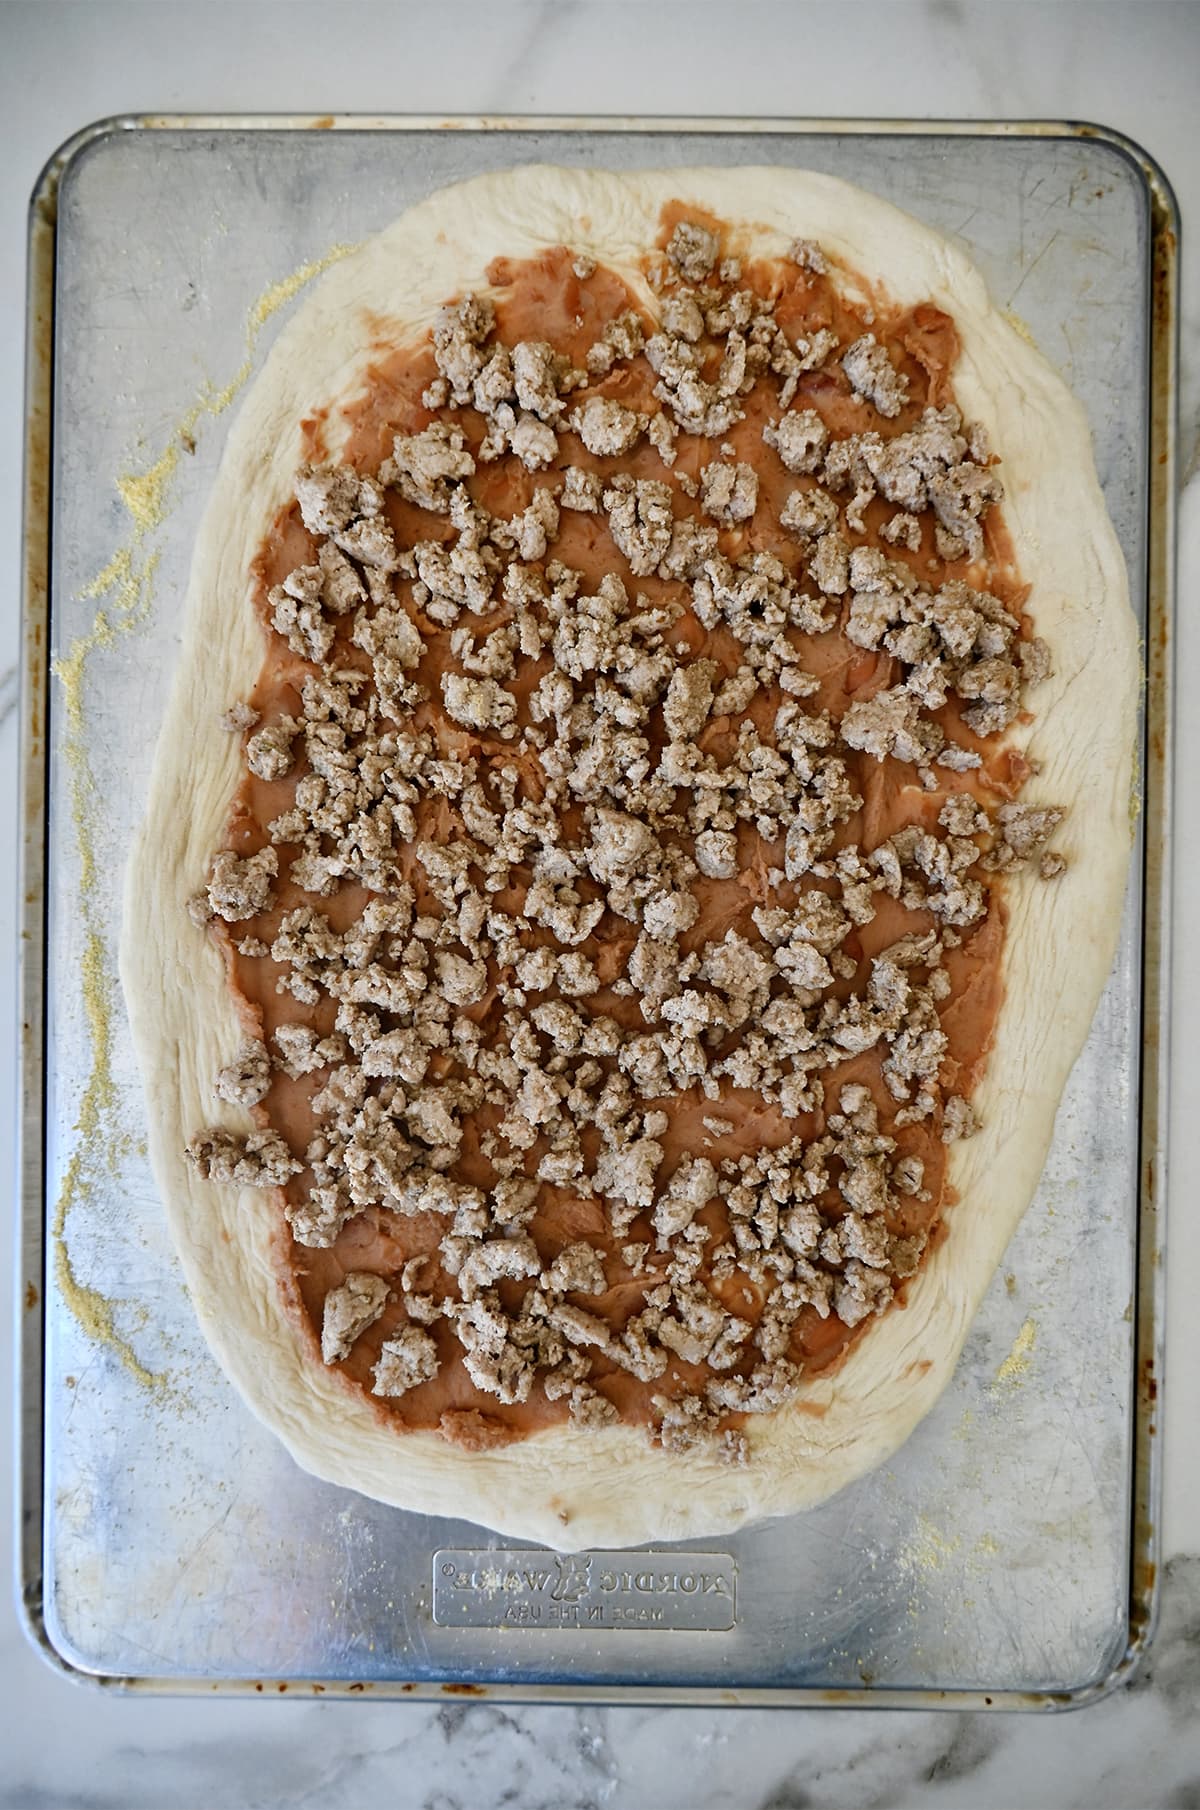 Pizza dough topped with refried beans and cooked ground chicken on a baking sheet.